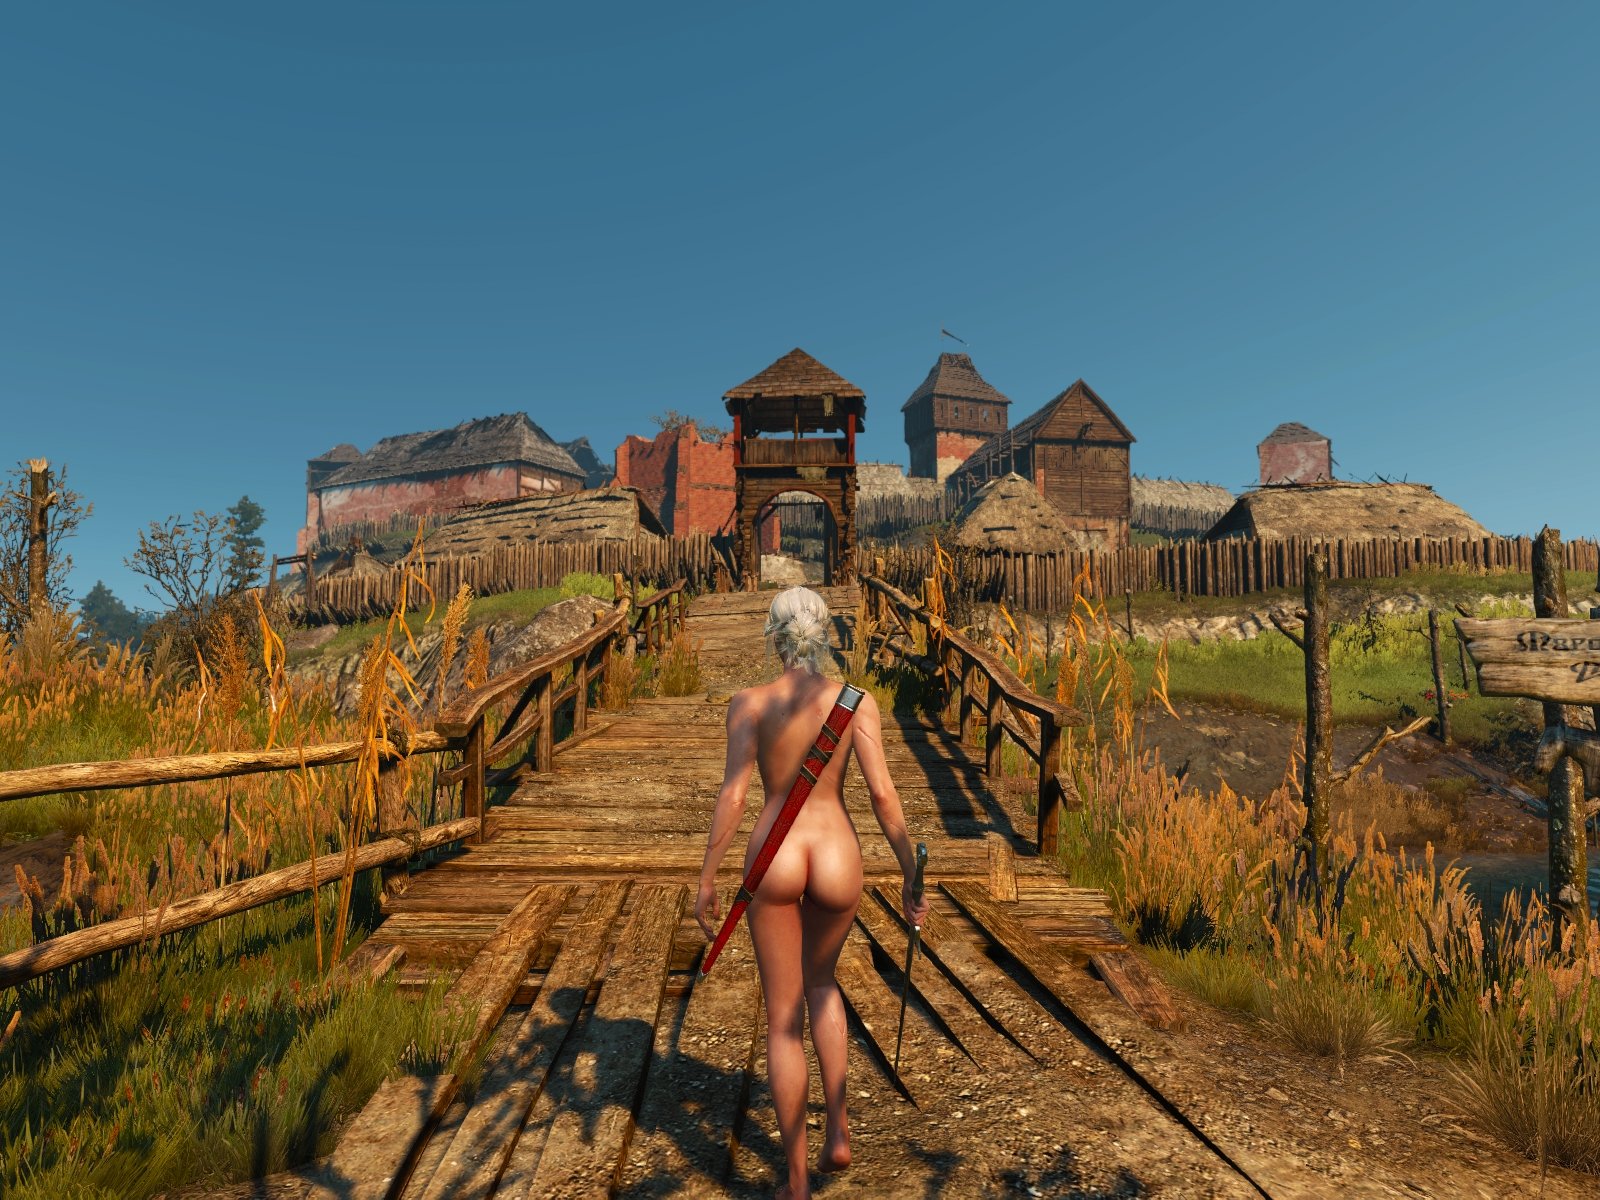 agung budi cahyono recommends The Witcher Nude Mod